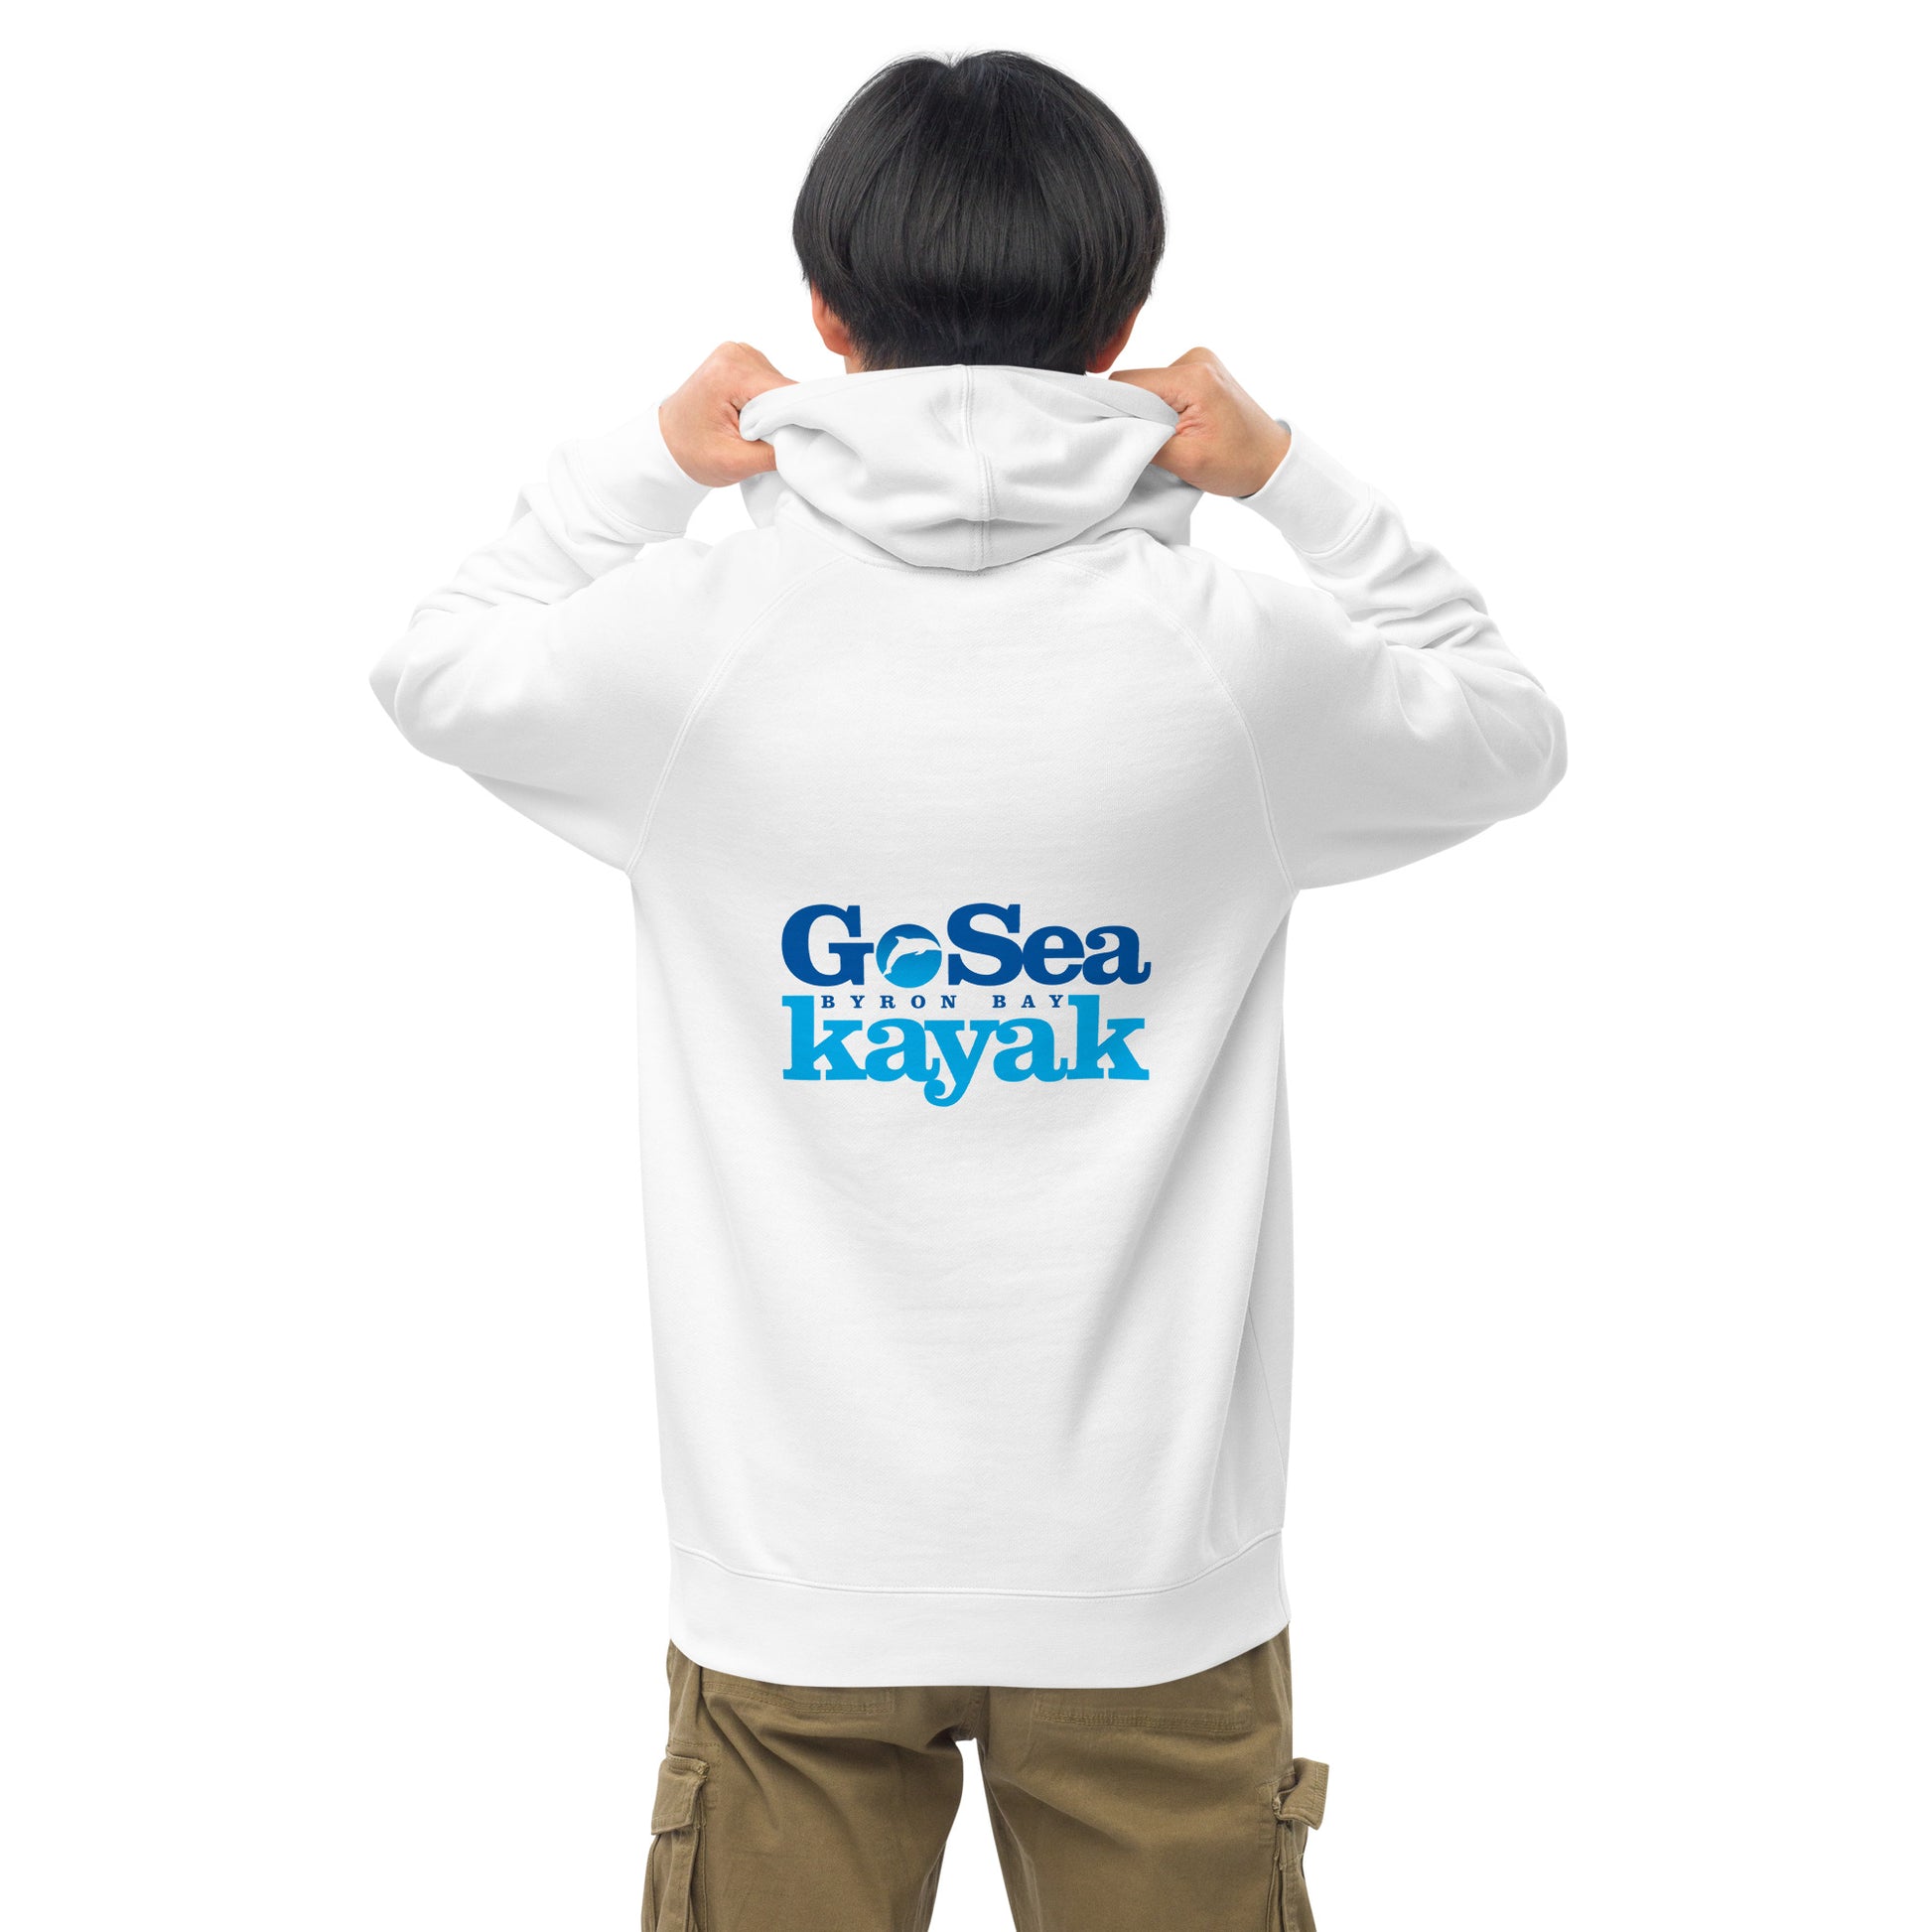  Unisex Hoodie - White - Back view being warn by man pulling the hood on - Go Sea Kayak Byron Bay logo on back and front, Kangaroo pocket on front - Genuine Byron Bay Merchandise | Produced by Go Sea Kayak Byron Bay 